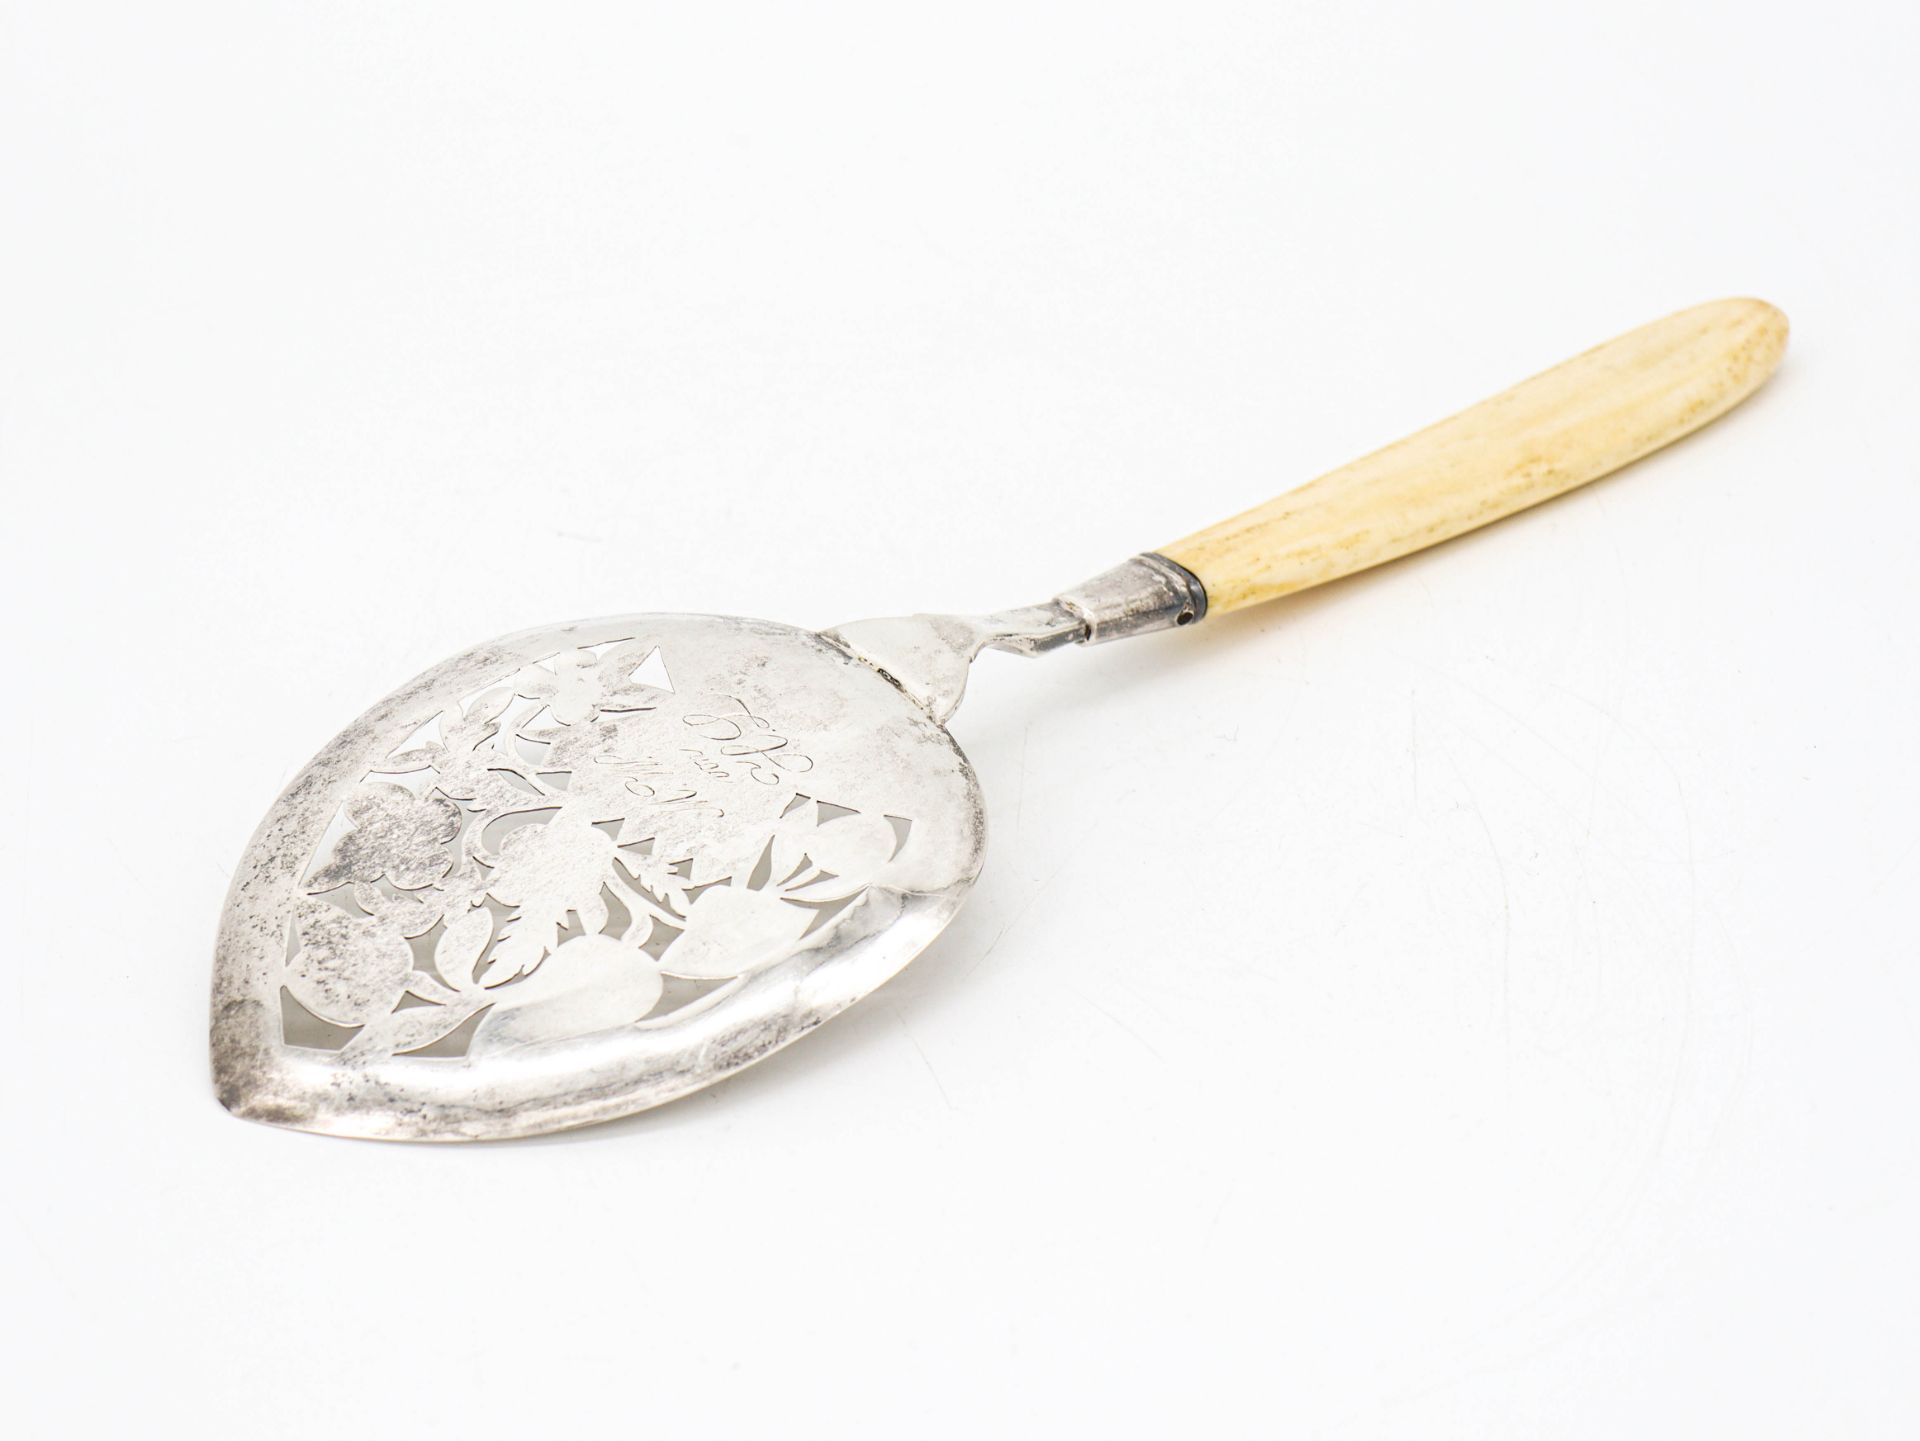 Pâté server with leg handle, chased silver, finest chasing, around 1800 - Image 4 of 7